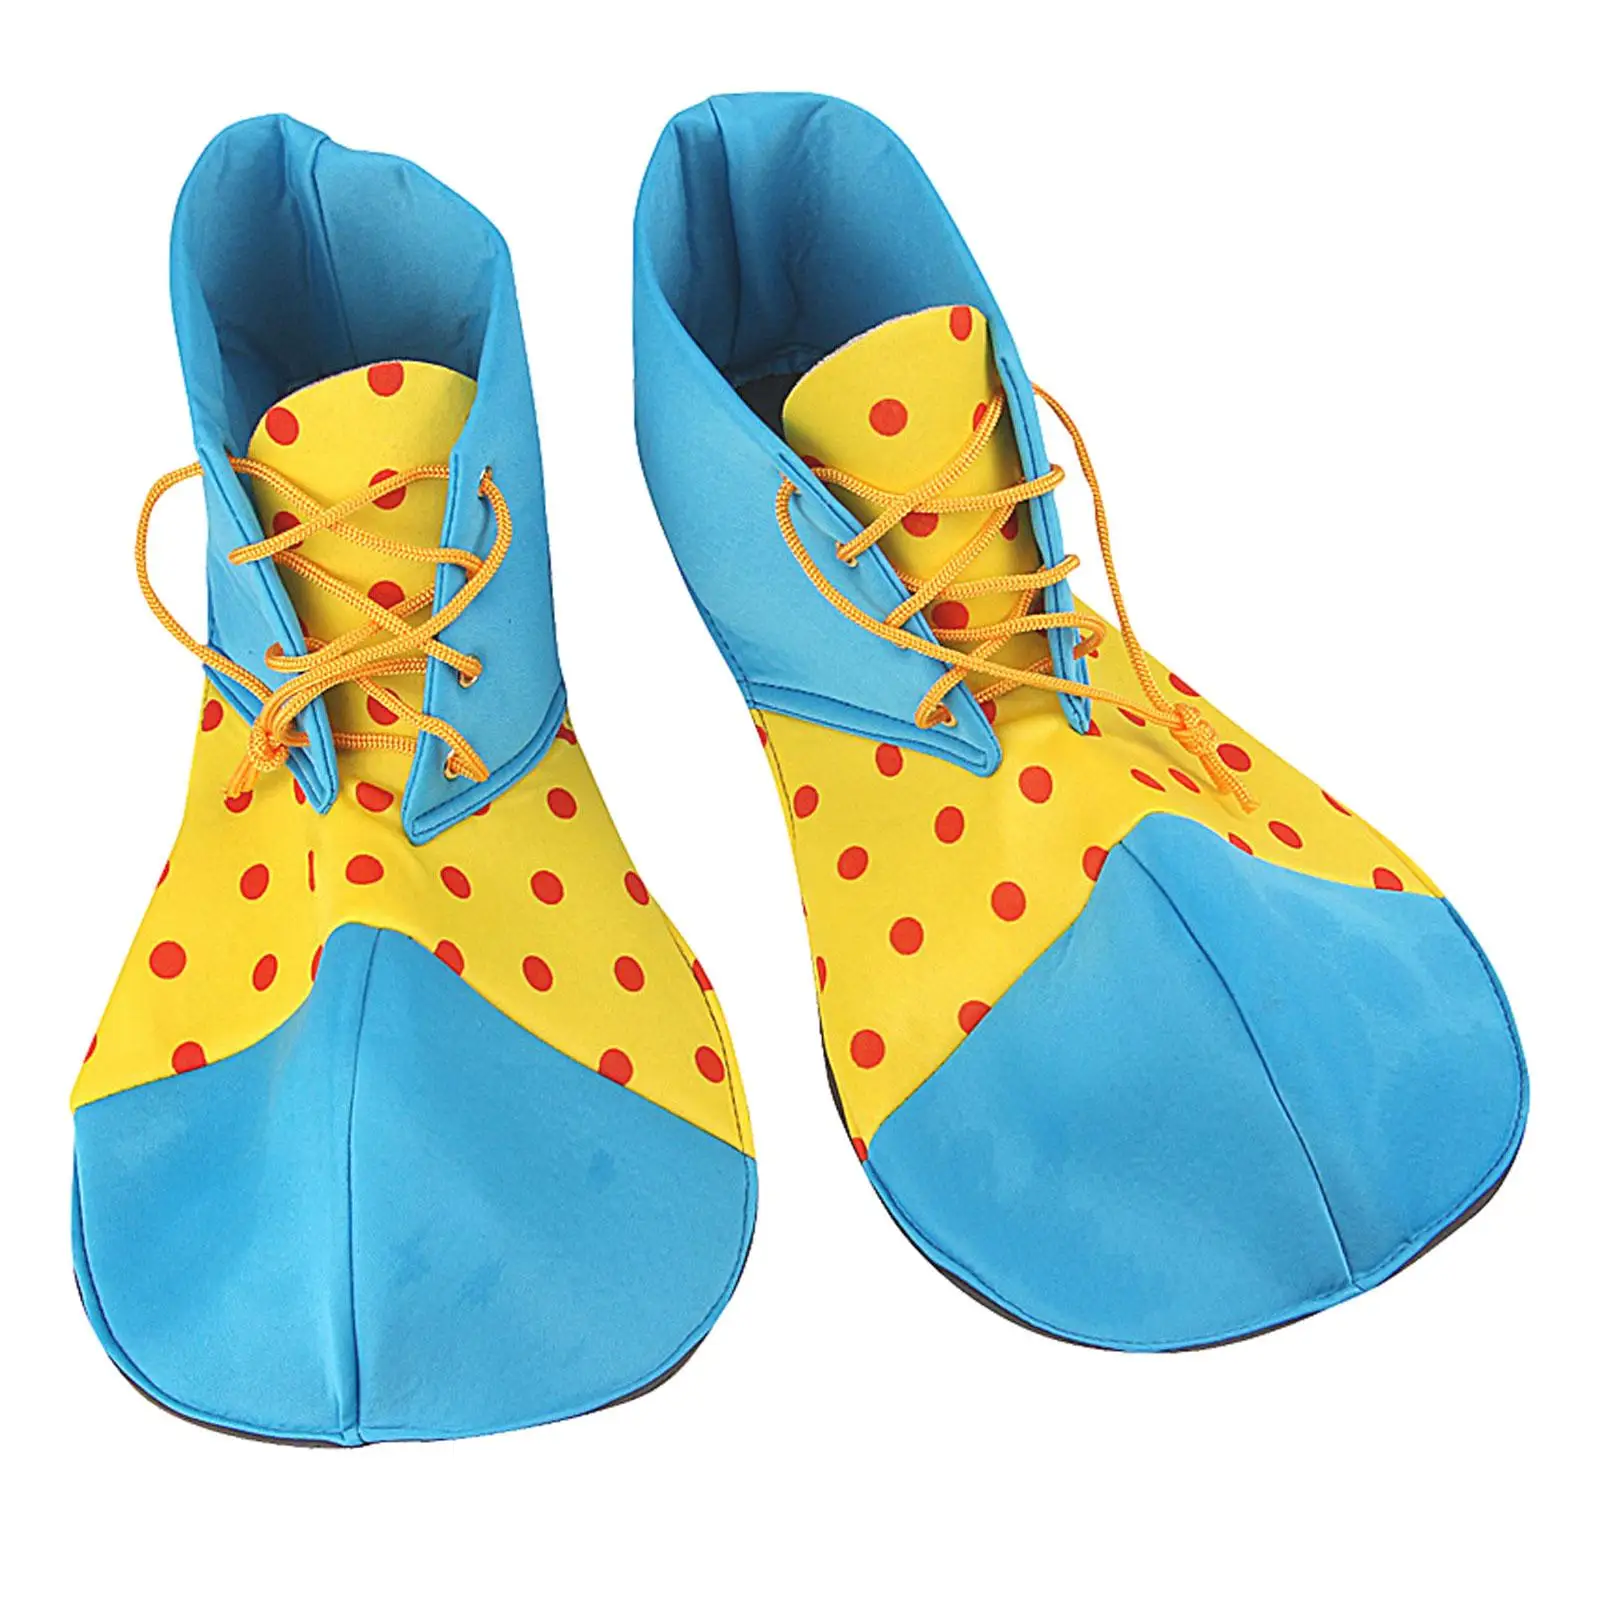 Adult Clown Shoes Christmas Elves Shoes Xmas PU Leather Christmas Party Costume